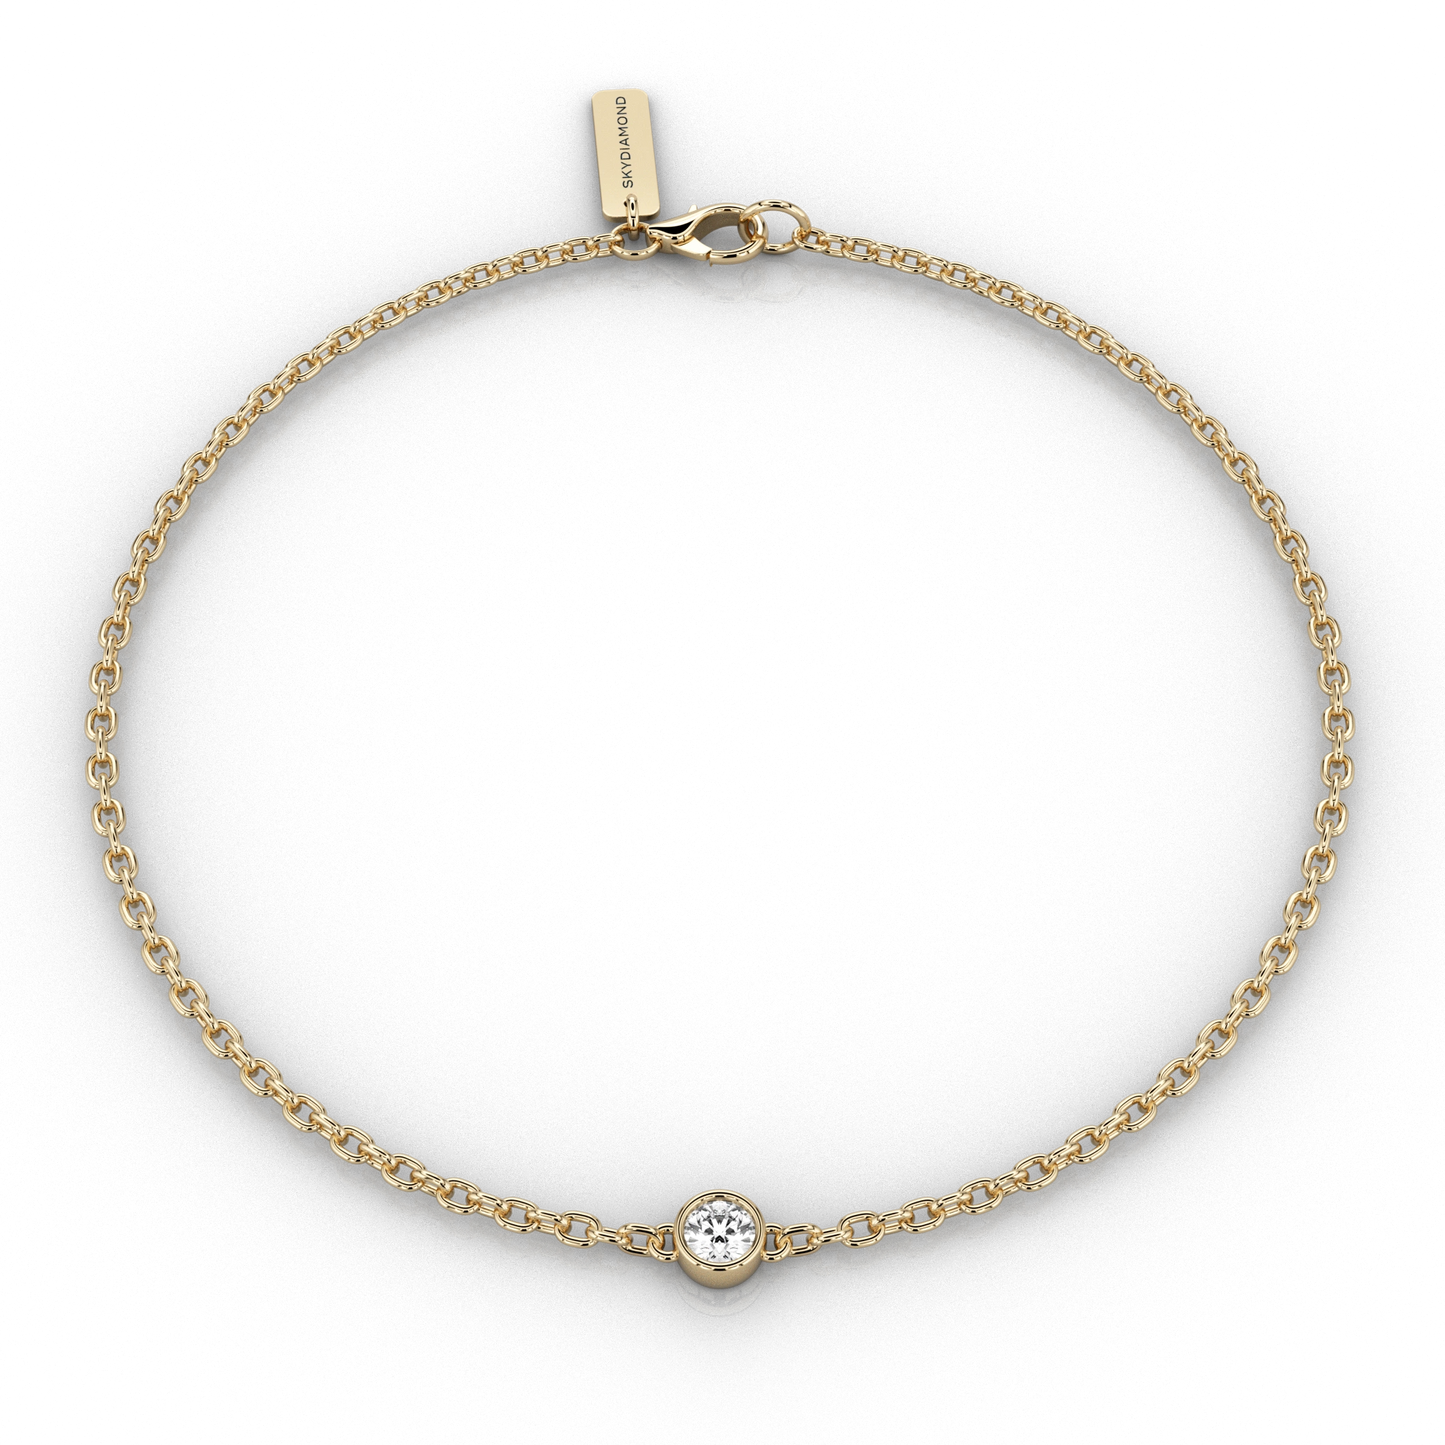 Faie 0.1ct chain bracelet in 18ct Yellow Gold